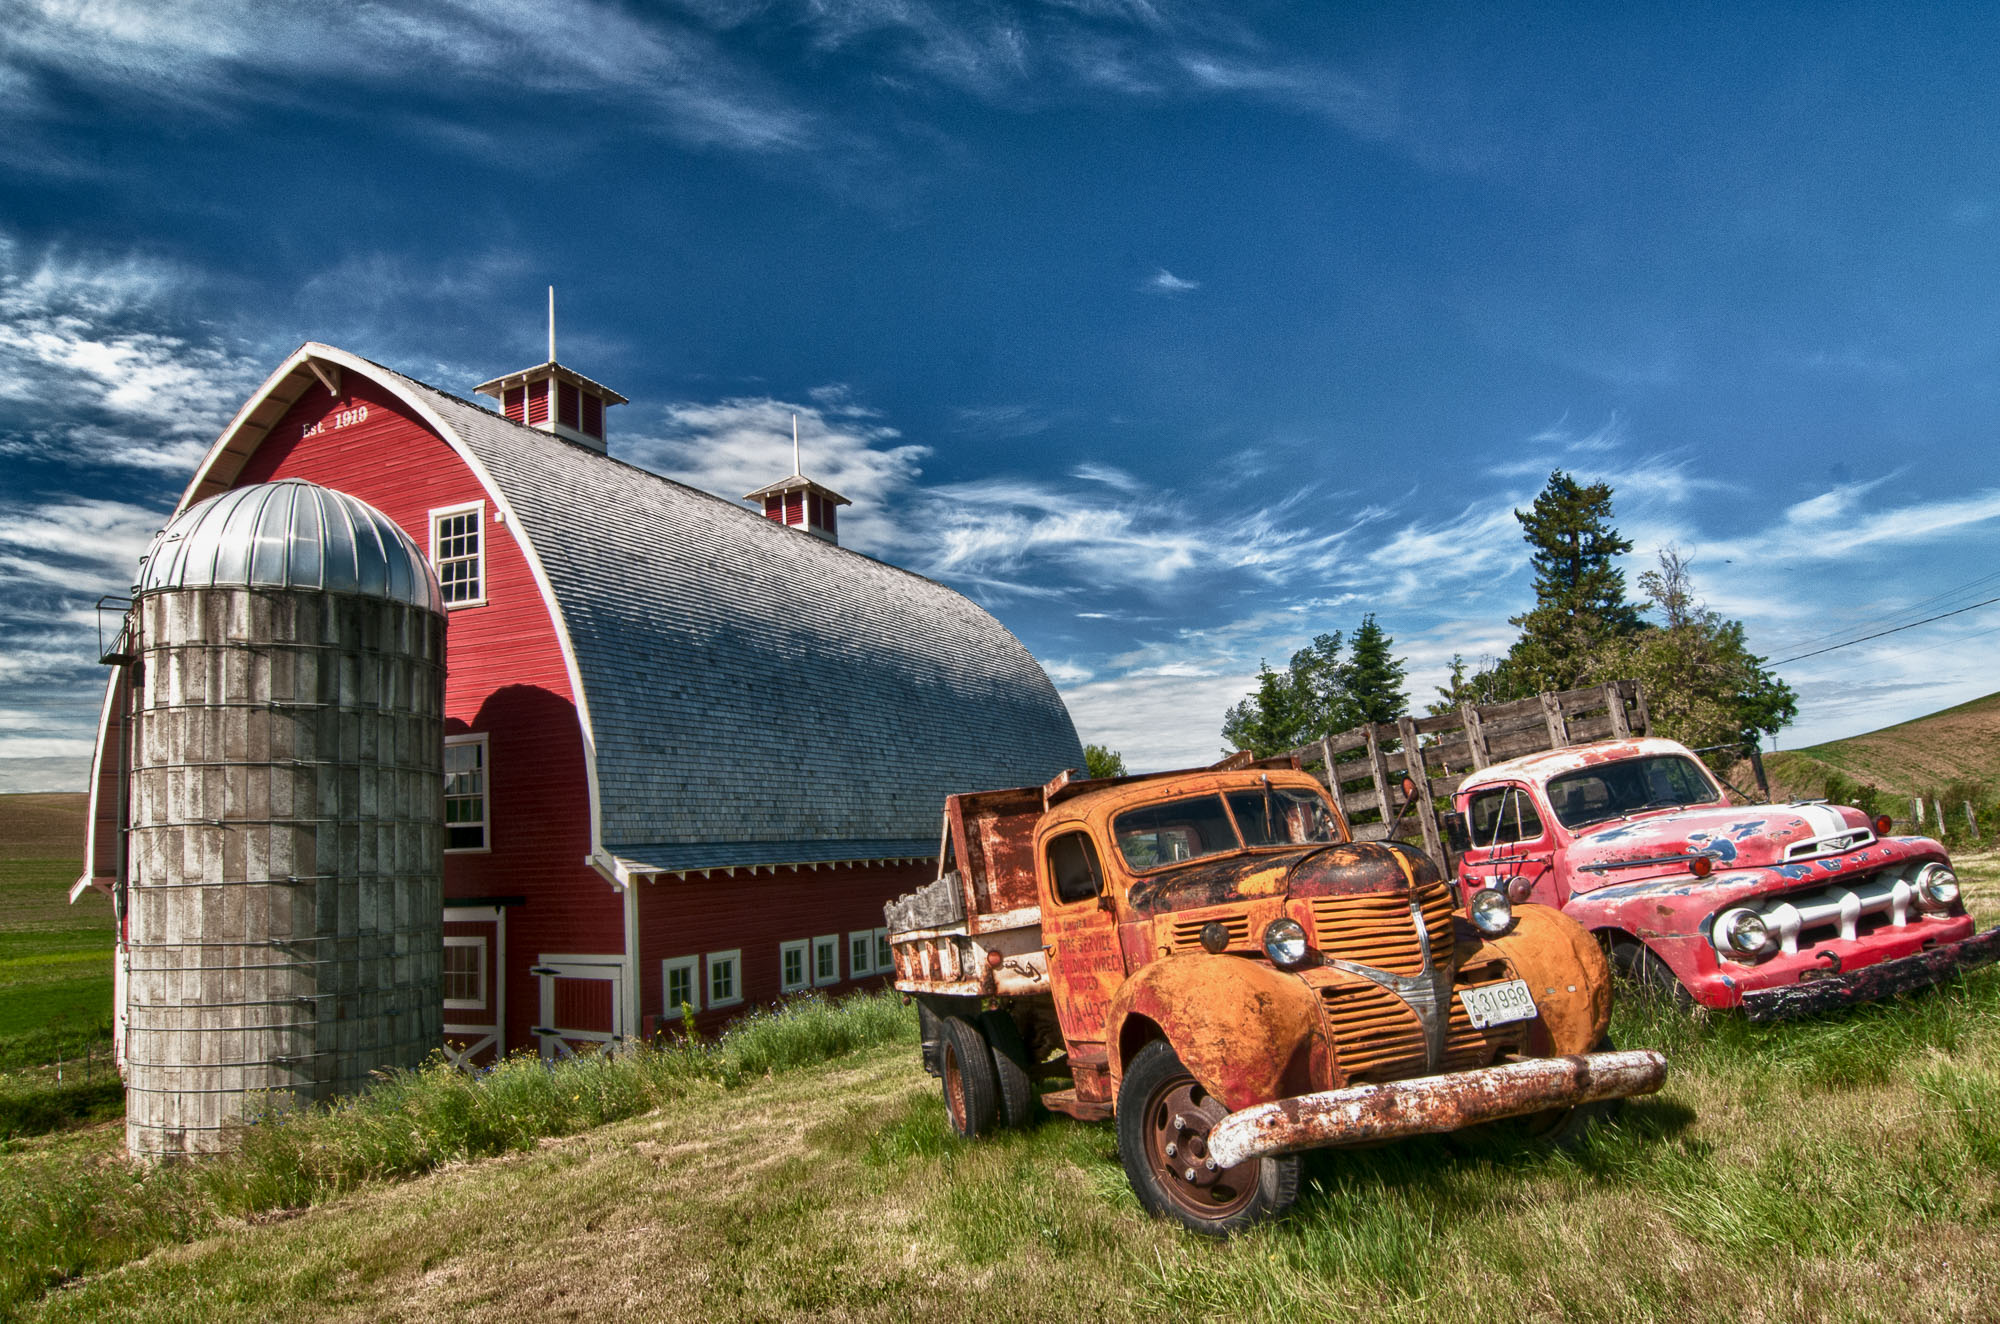 Barbee_120619_3_5865_HDR |  Old trucks near red barn outside of Colfax, WA - HDR image